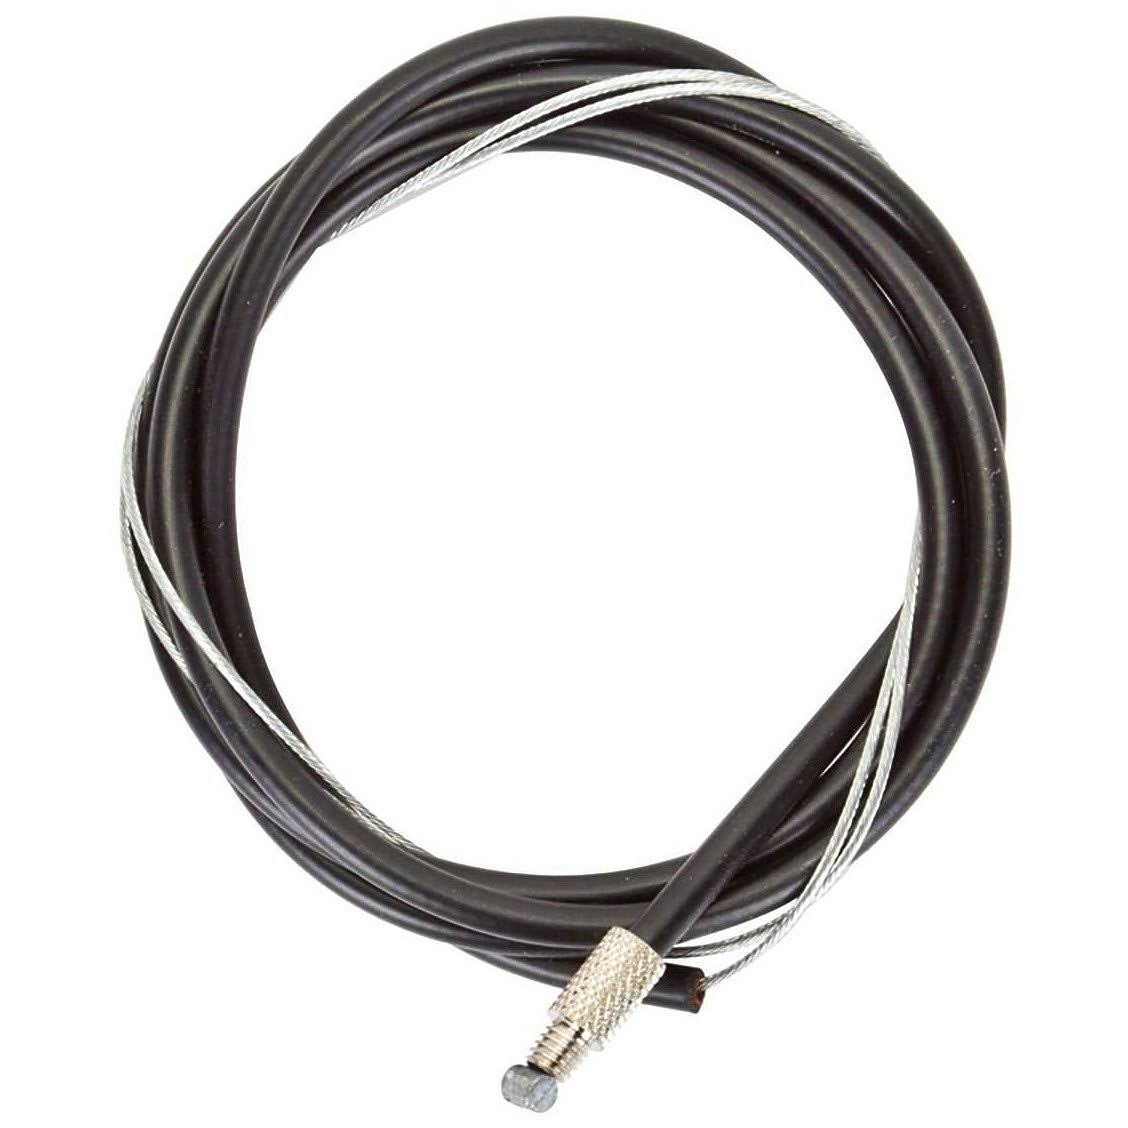 Sunlite Shifter Cable Shimano Type Universal 42X65 - 3 Speed